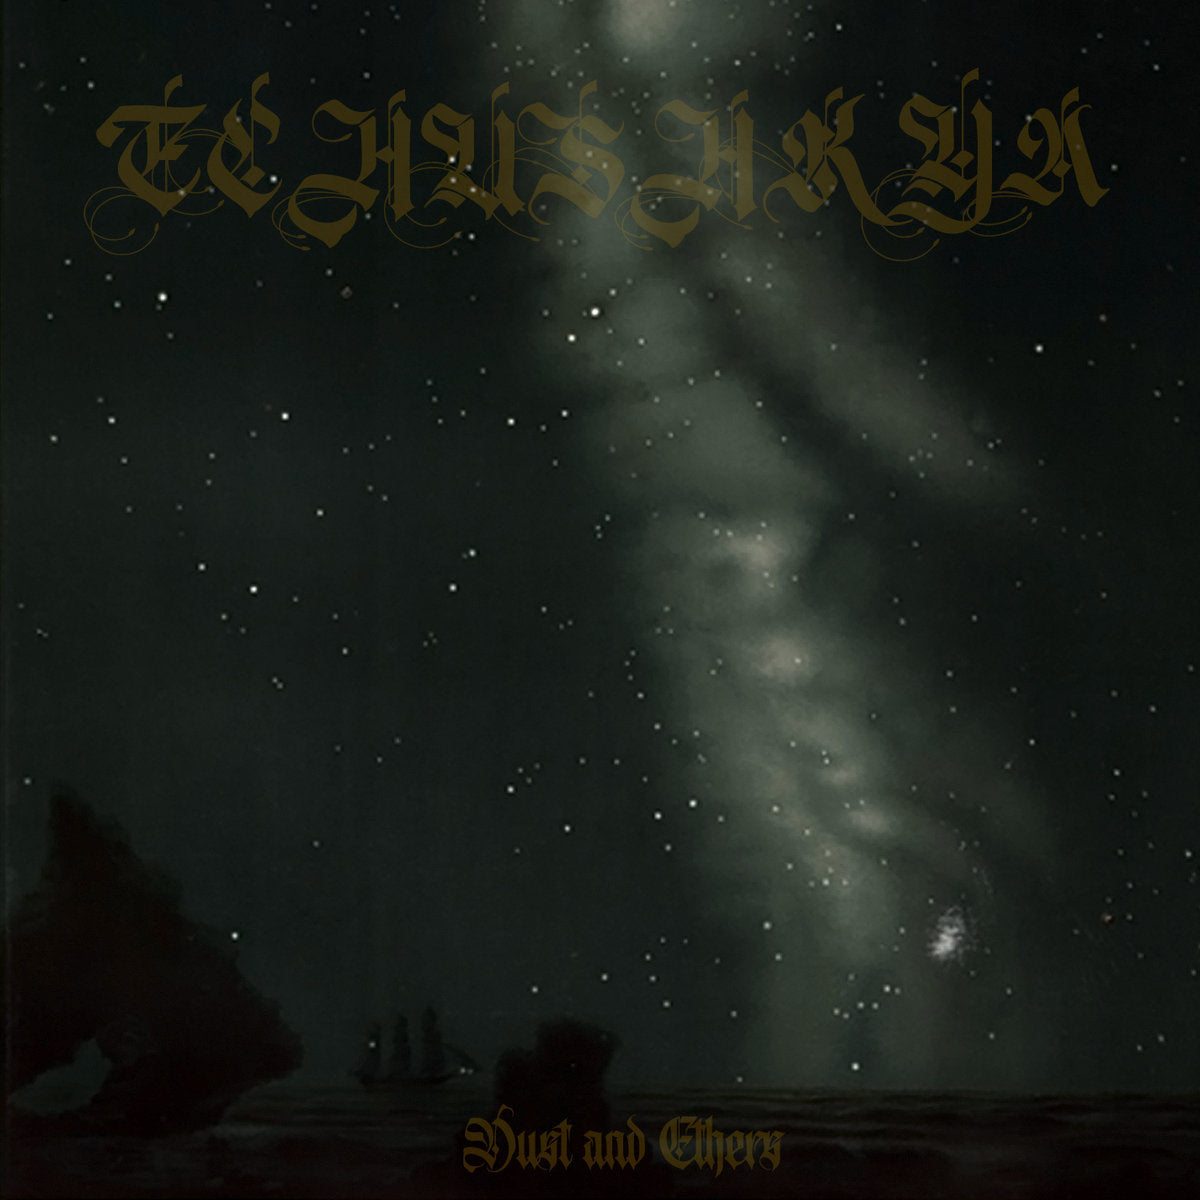 Echushkya - Dust and Ethers LP